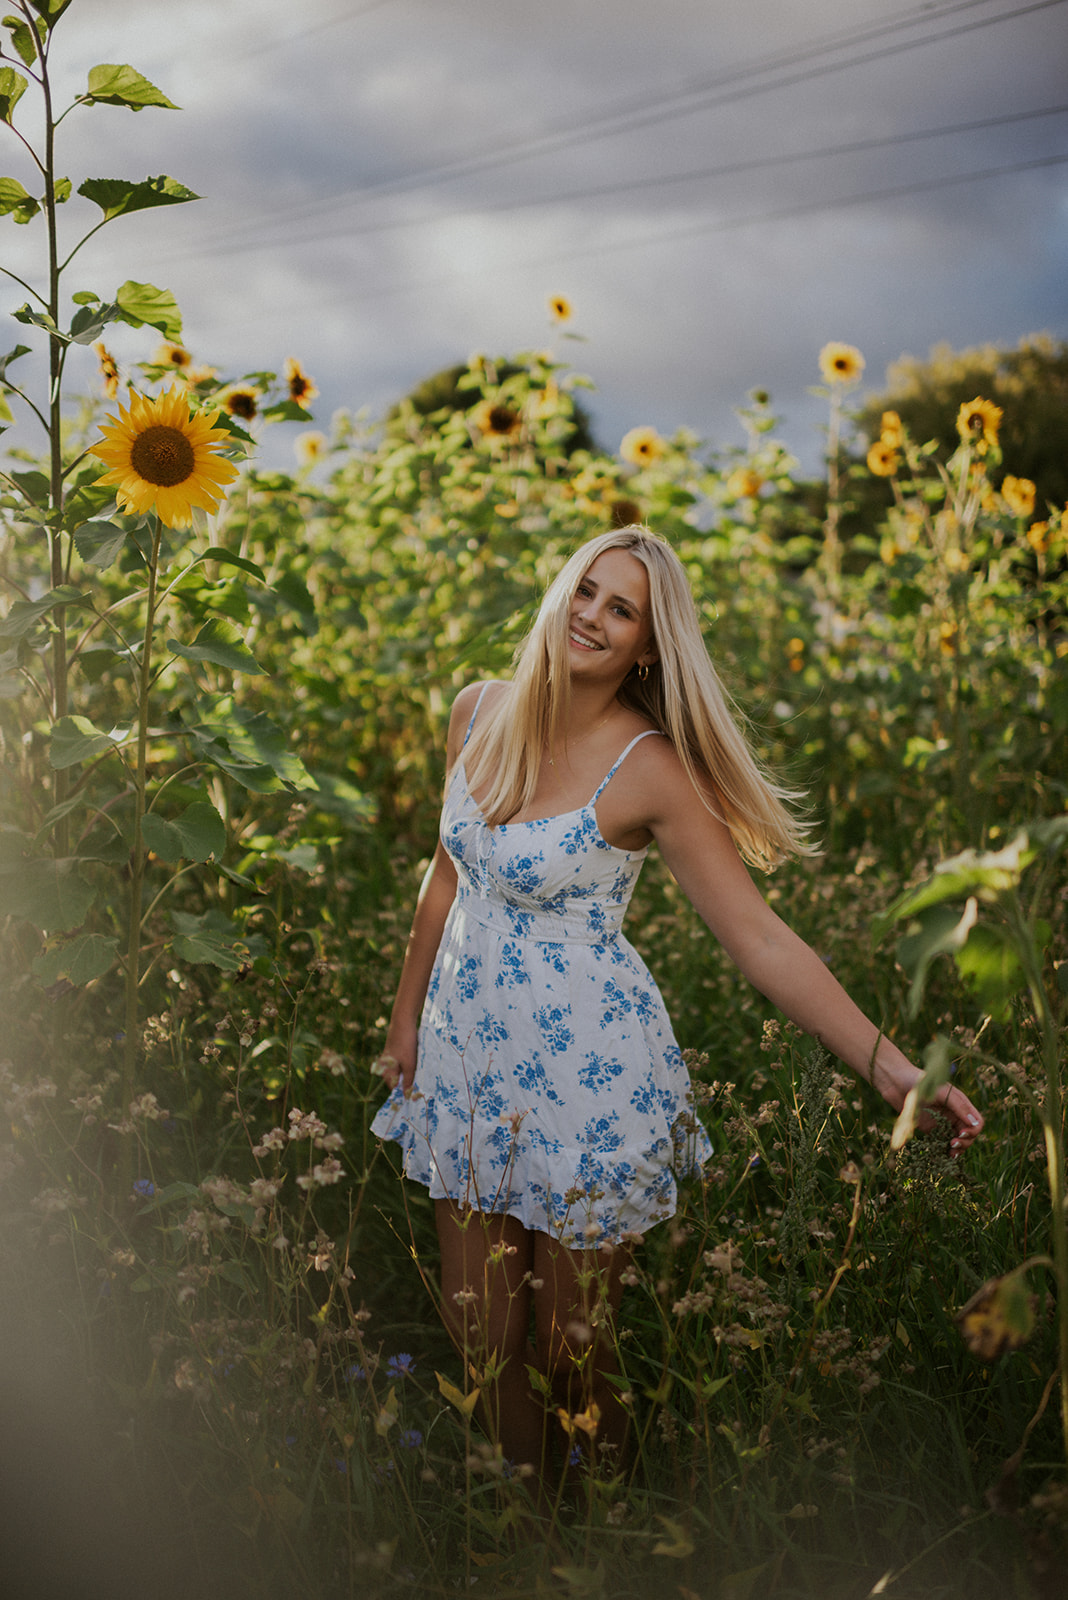 northern michigan senior session in a flower field